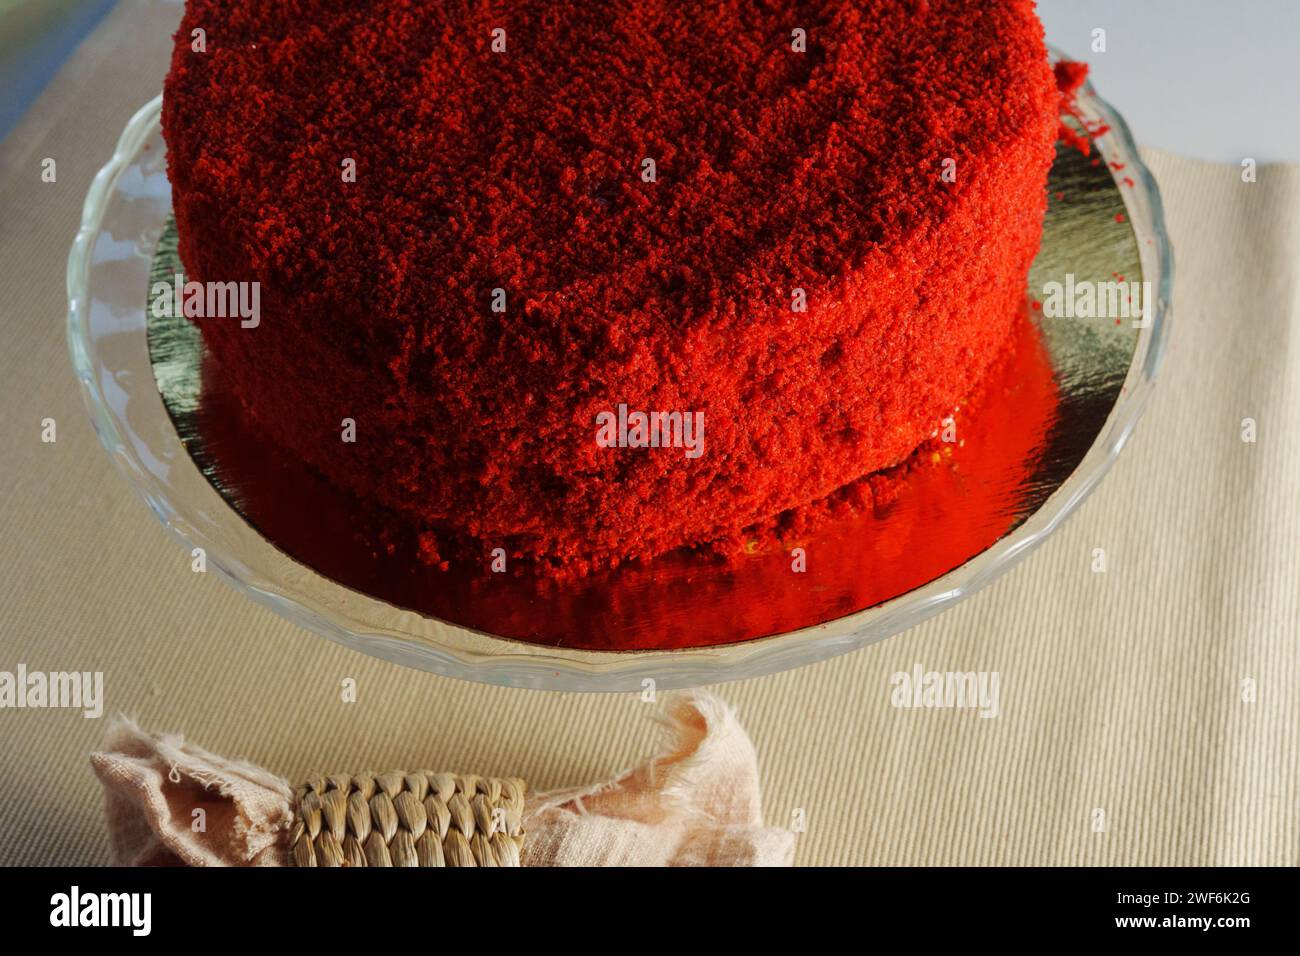 Red velvet cake takes center stage, served on a transparent glass dish Stock Photo